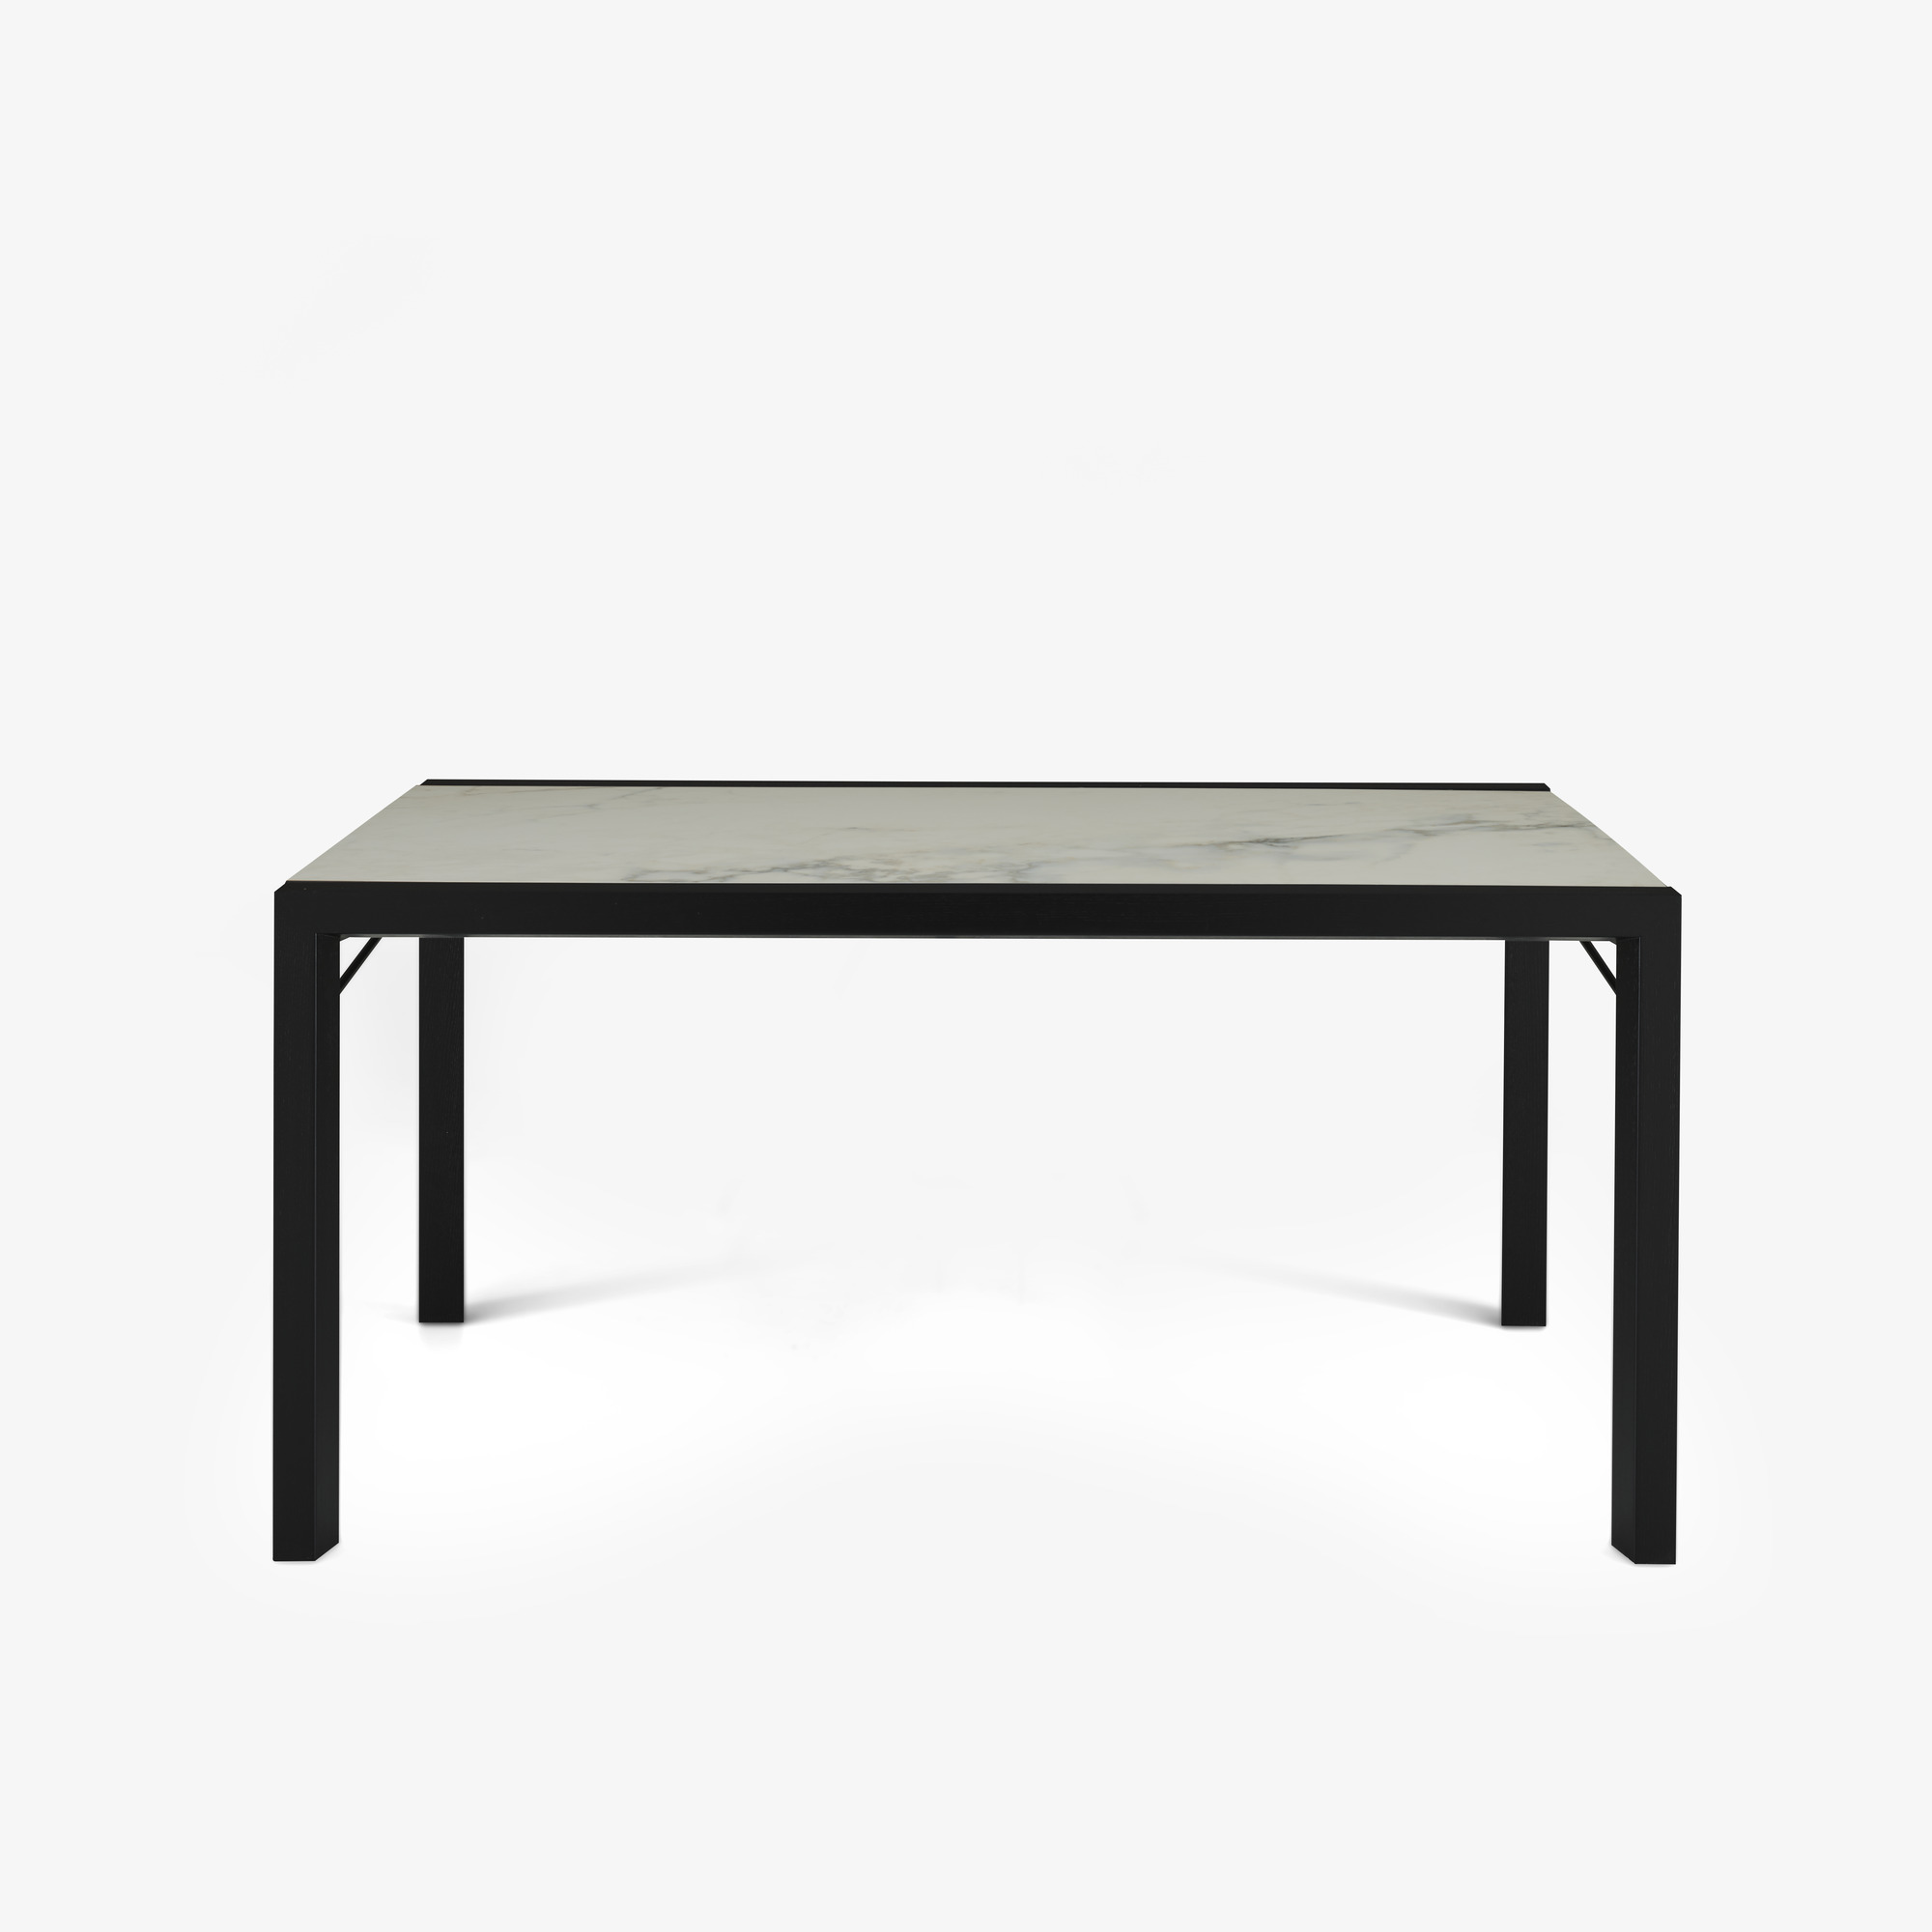 Image Dining table top in white marble-effect ceramic stoneware base in black stained ash 1